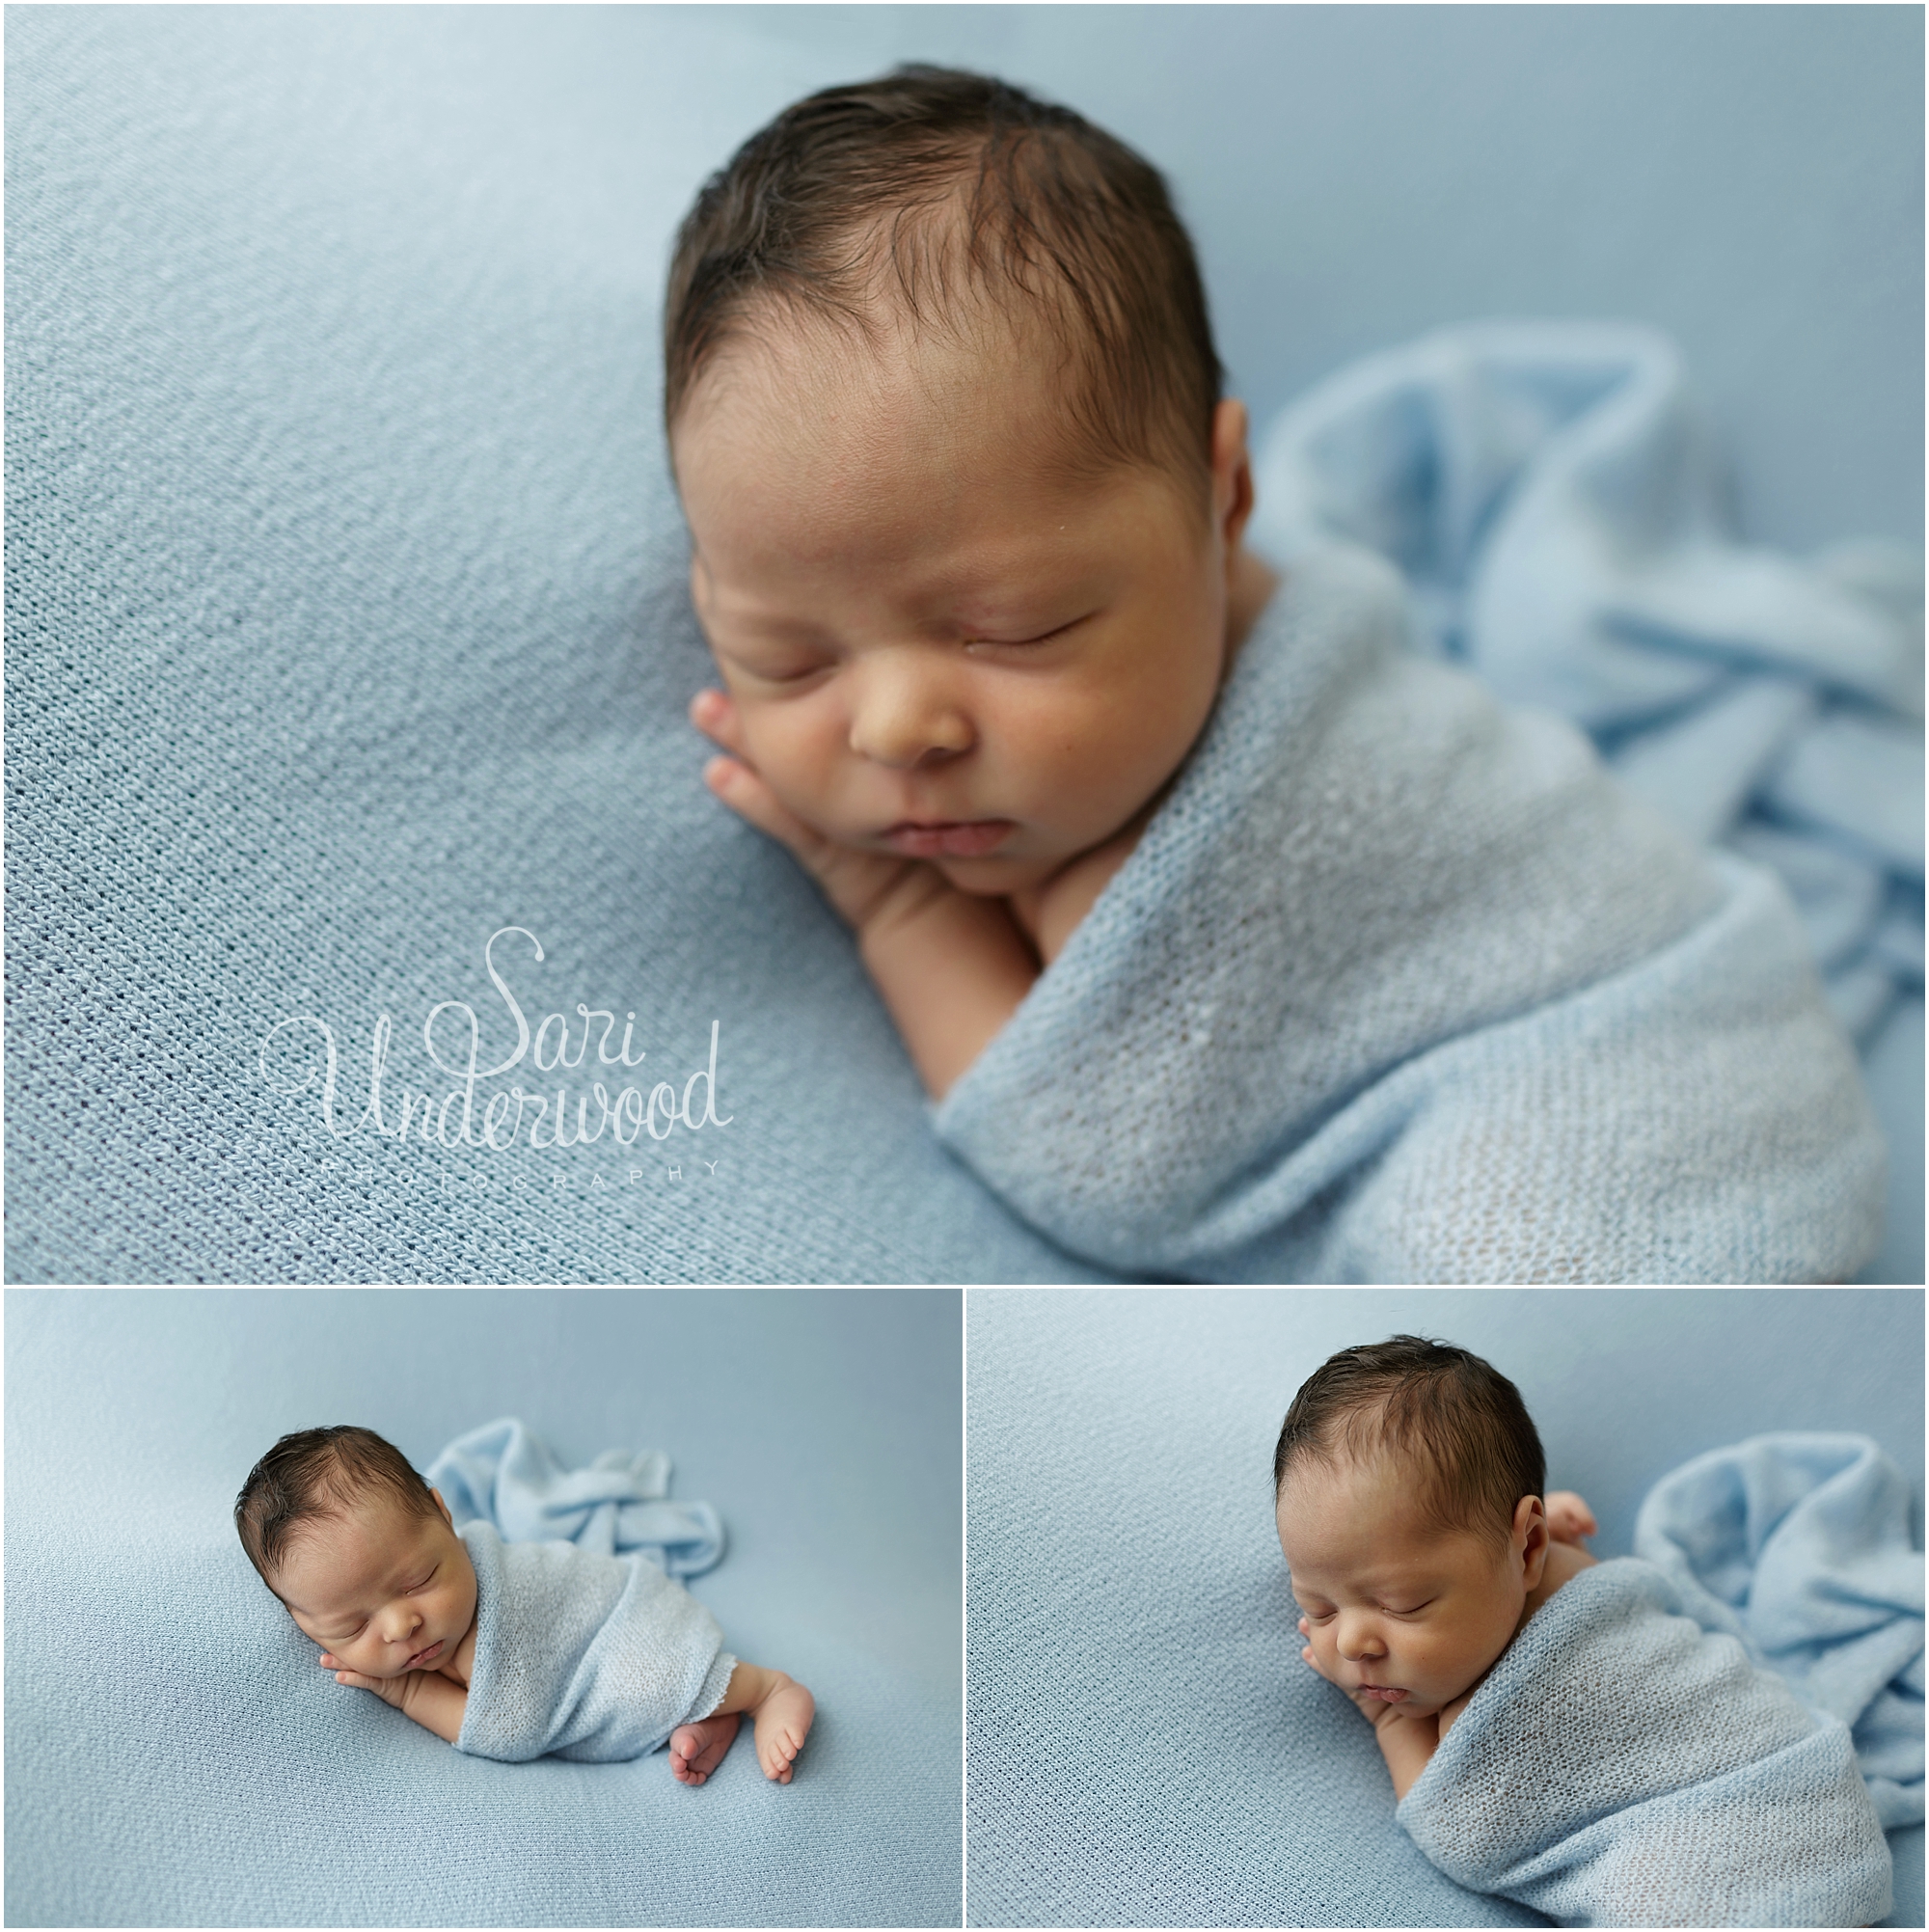 9 day old baby boy in baby blue